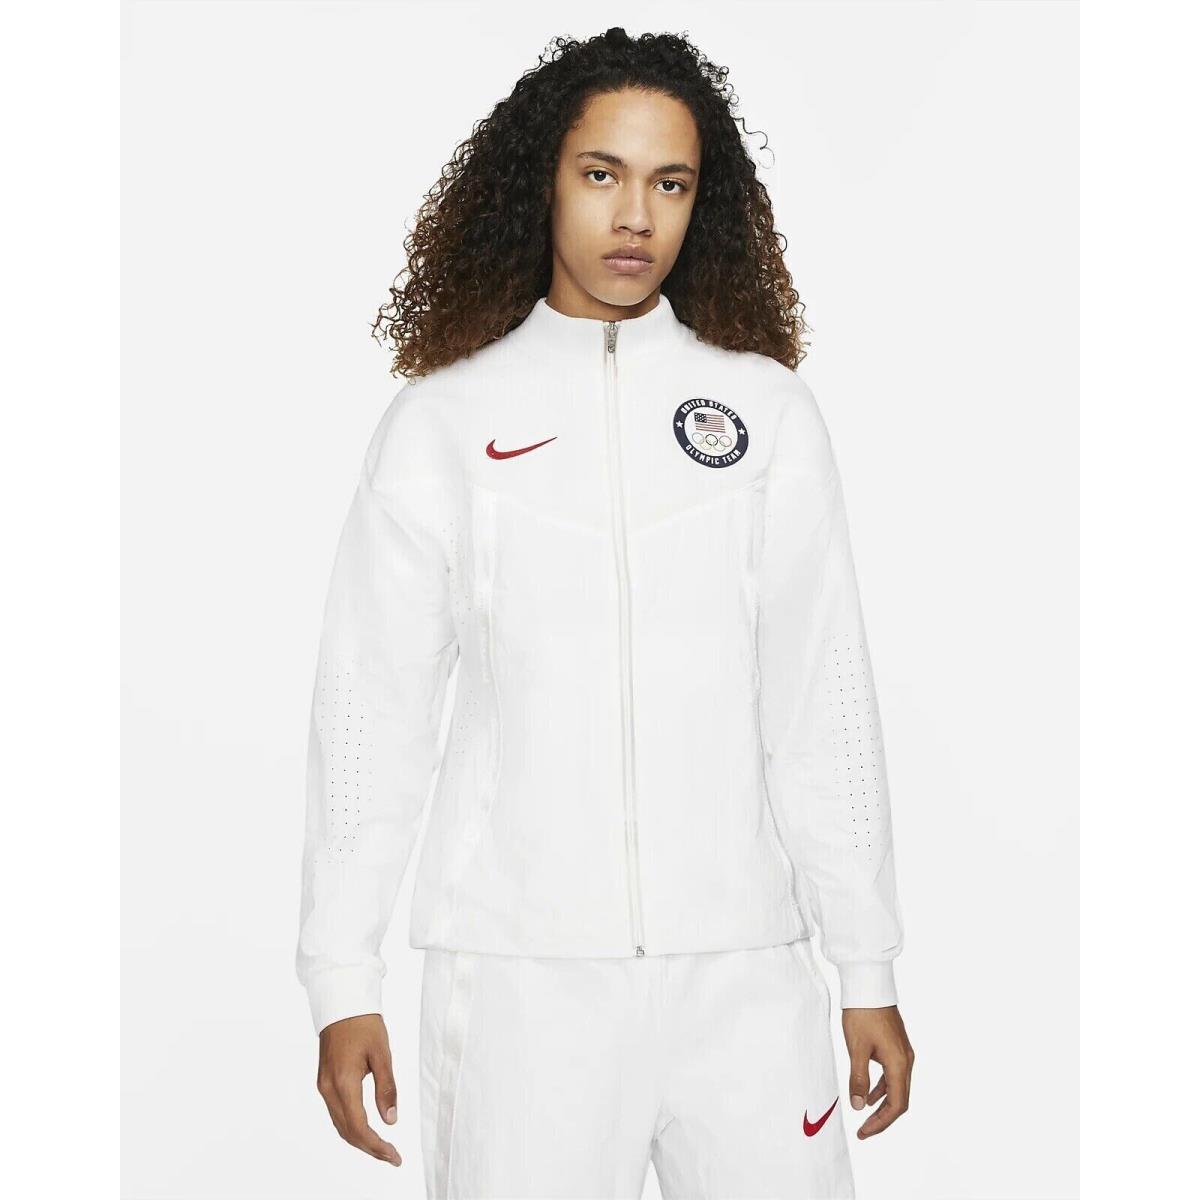 Nike Team Usa Medal Stand Olympic Windrunner Jacket White Mens Sz XS CK4552-100